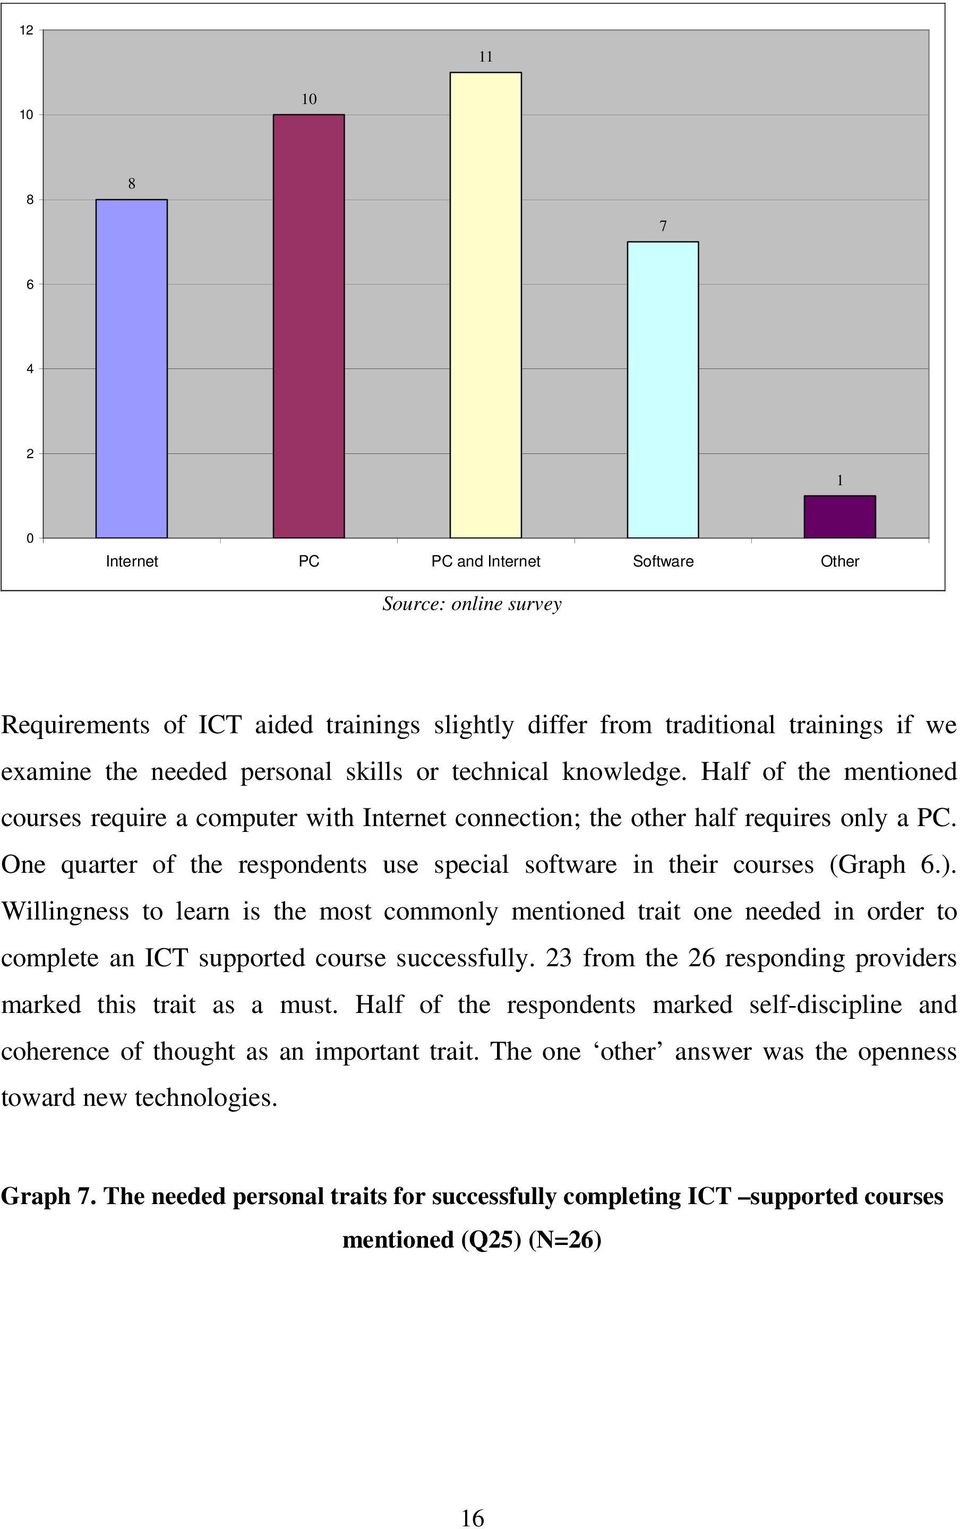 One quarter of the respondents use special software in their courses (Graph 6.).